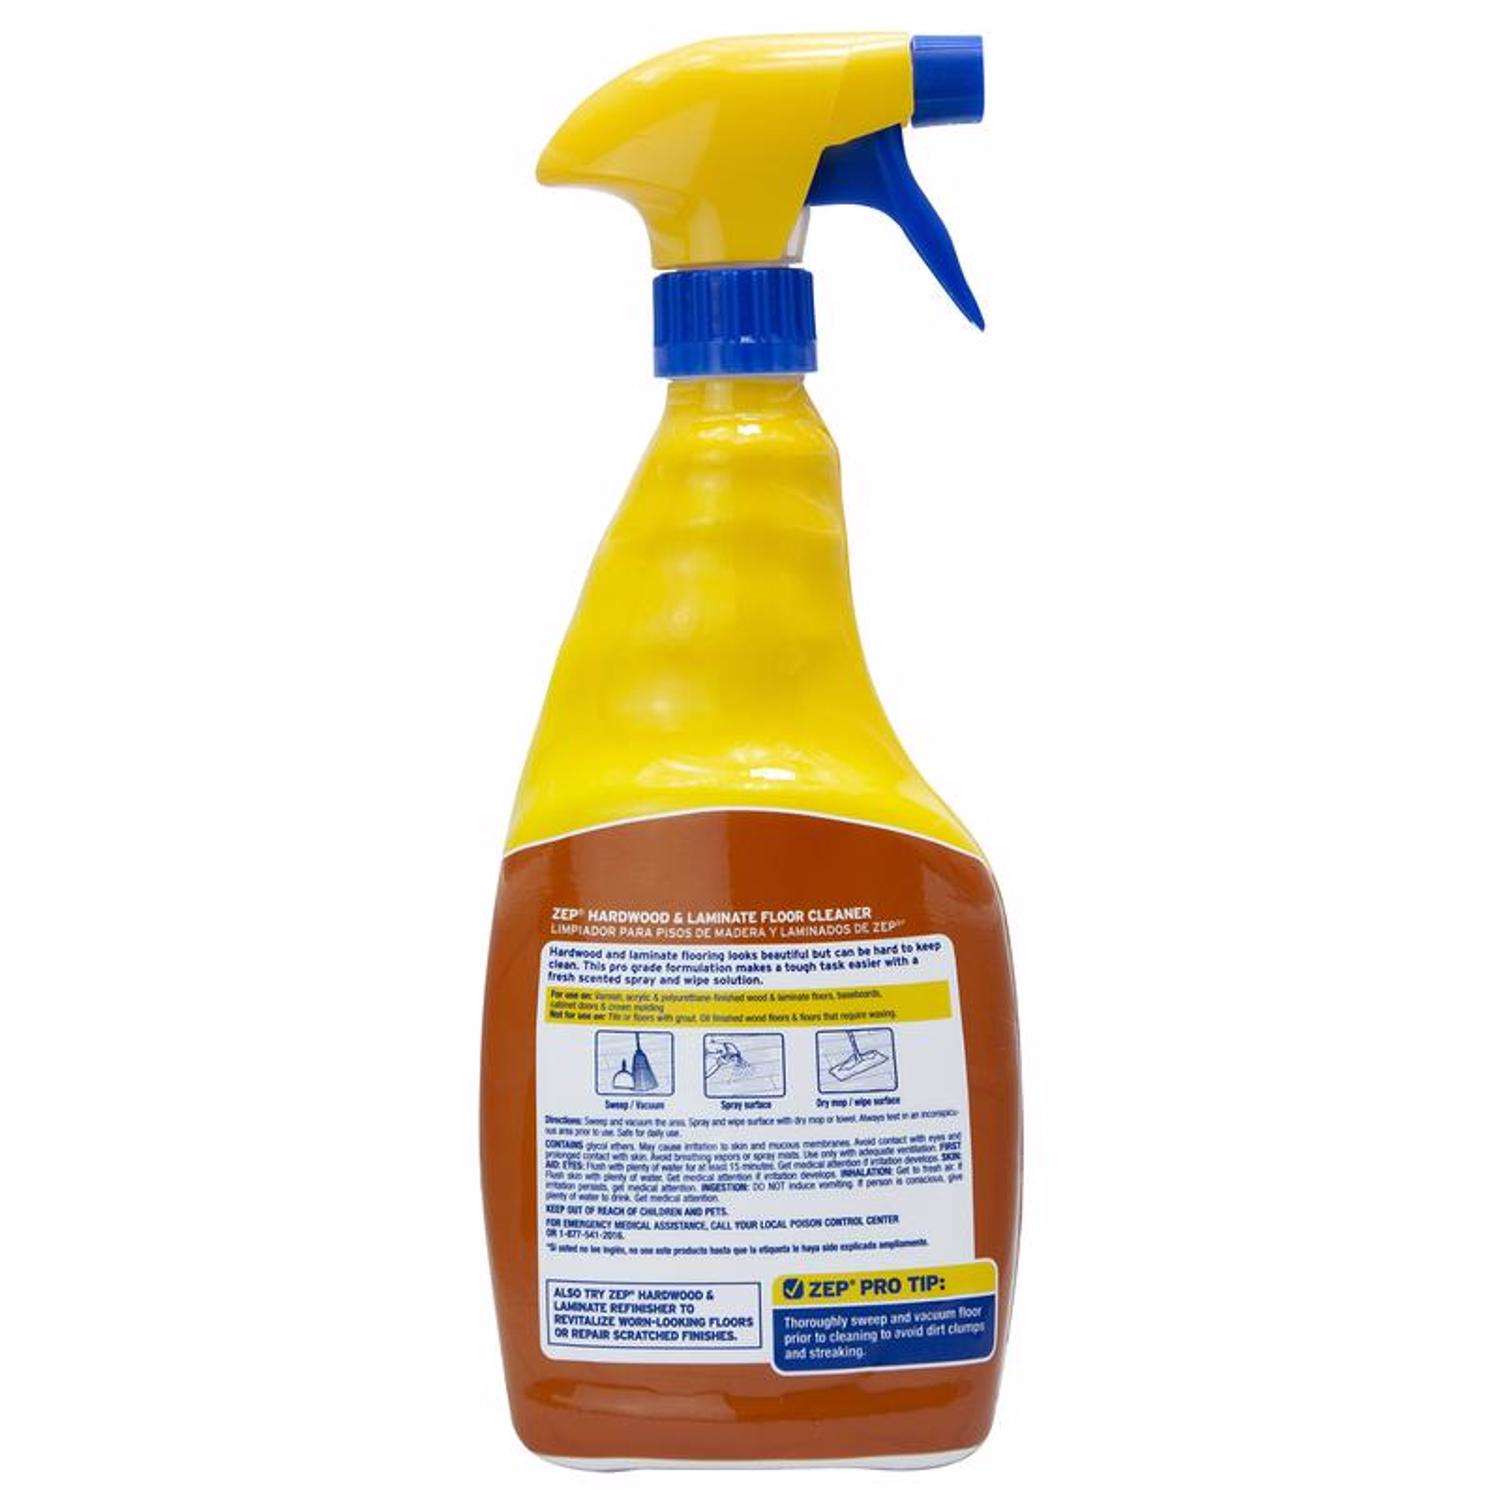 Clean My Steel Surface Cleaners, Fresh Scent, 4 Fluid Ounce, Size: 4 fl oz, Clear